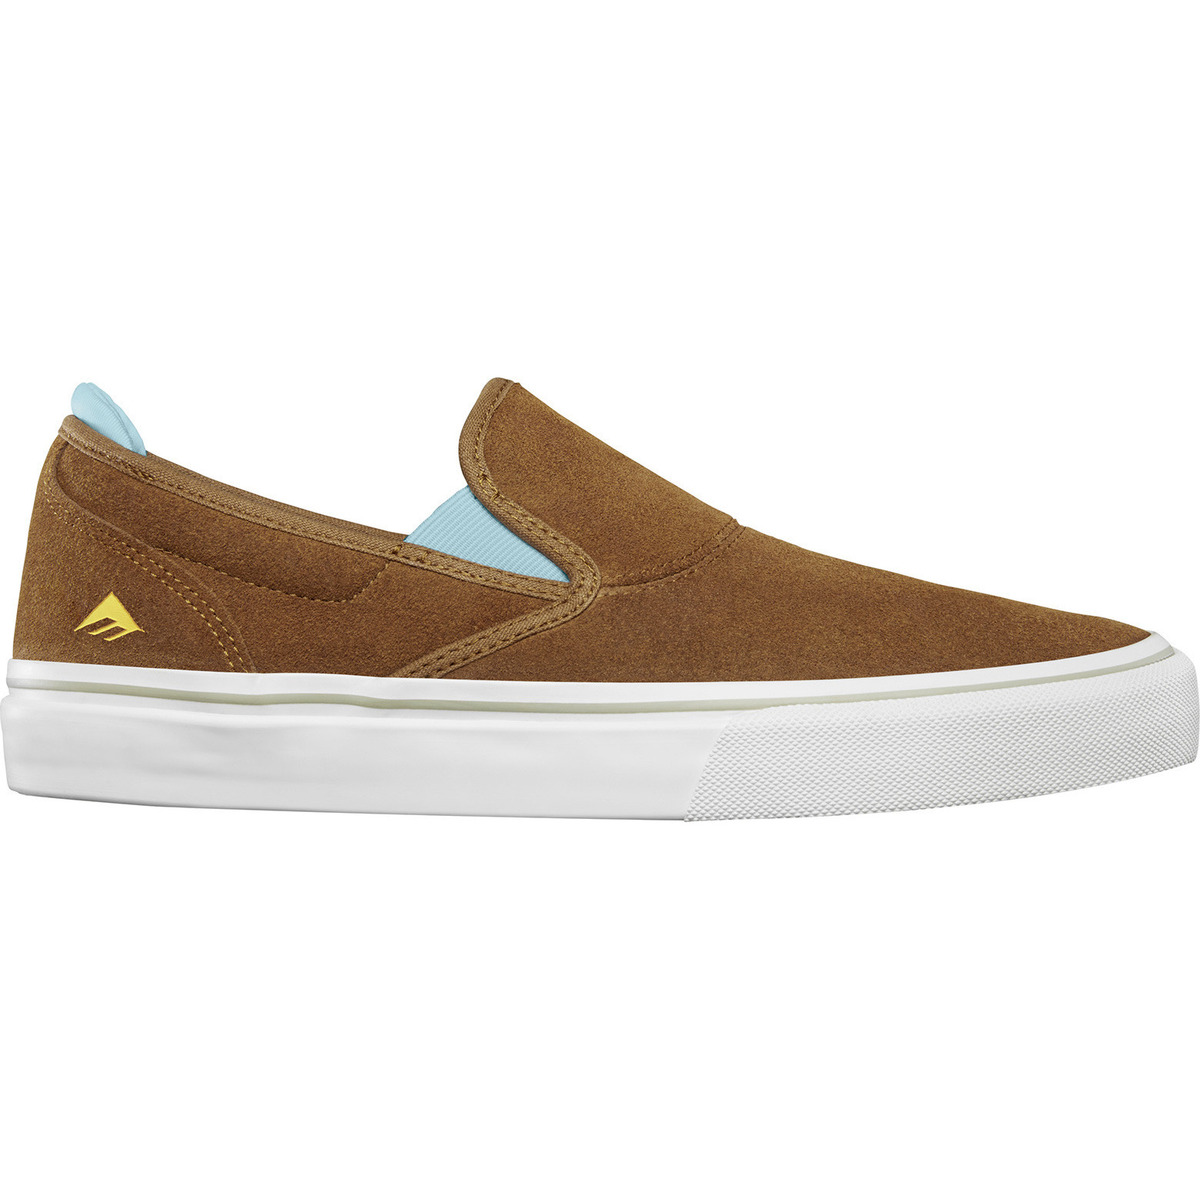 Chaussures Tous les vêtements homme Emerica WINO G6 SLIP ON BROWN BLUE 